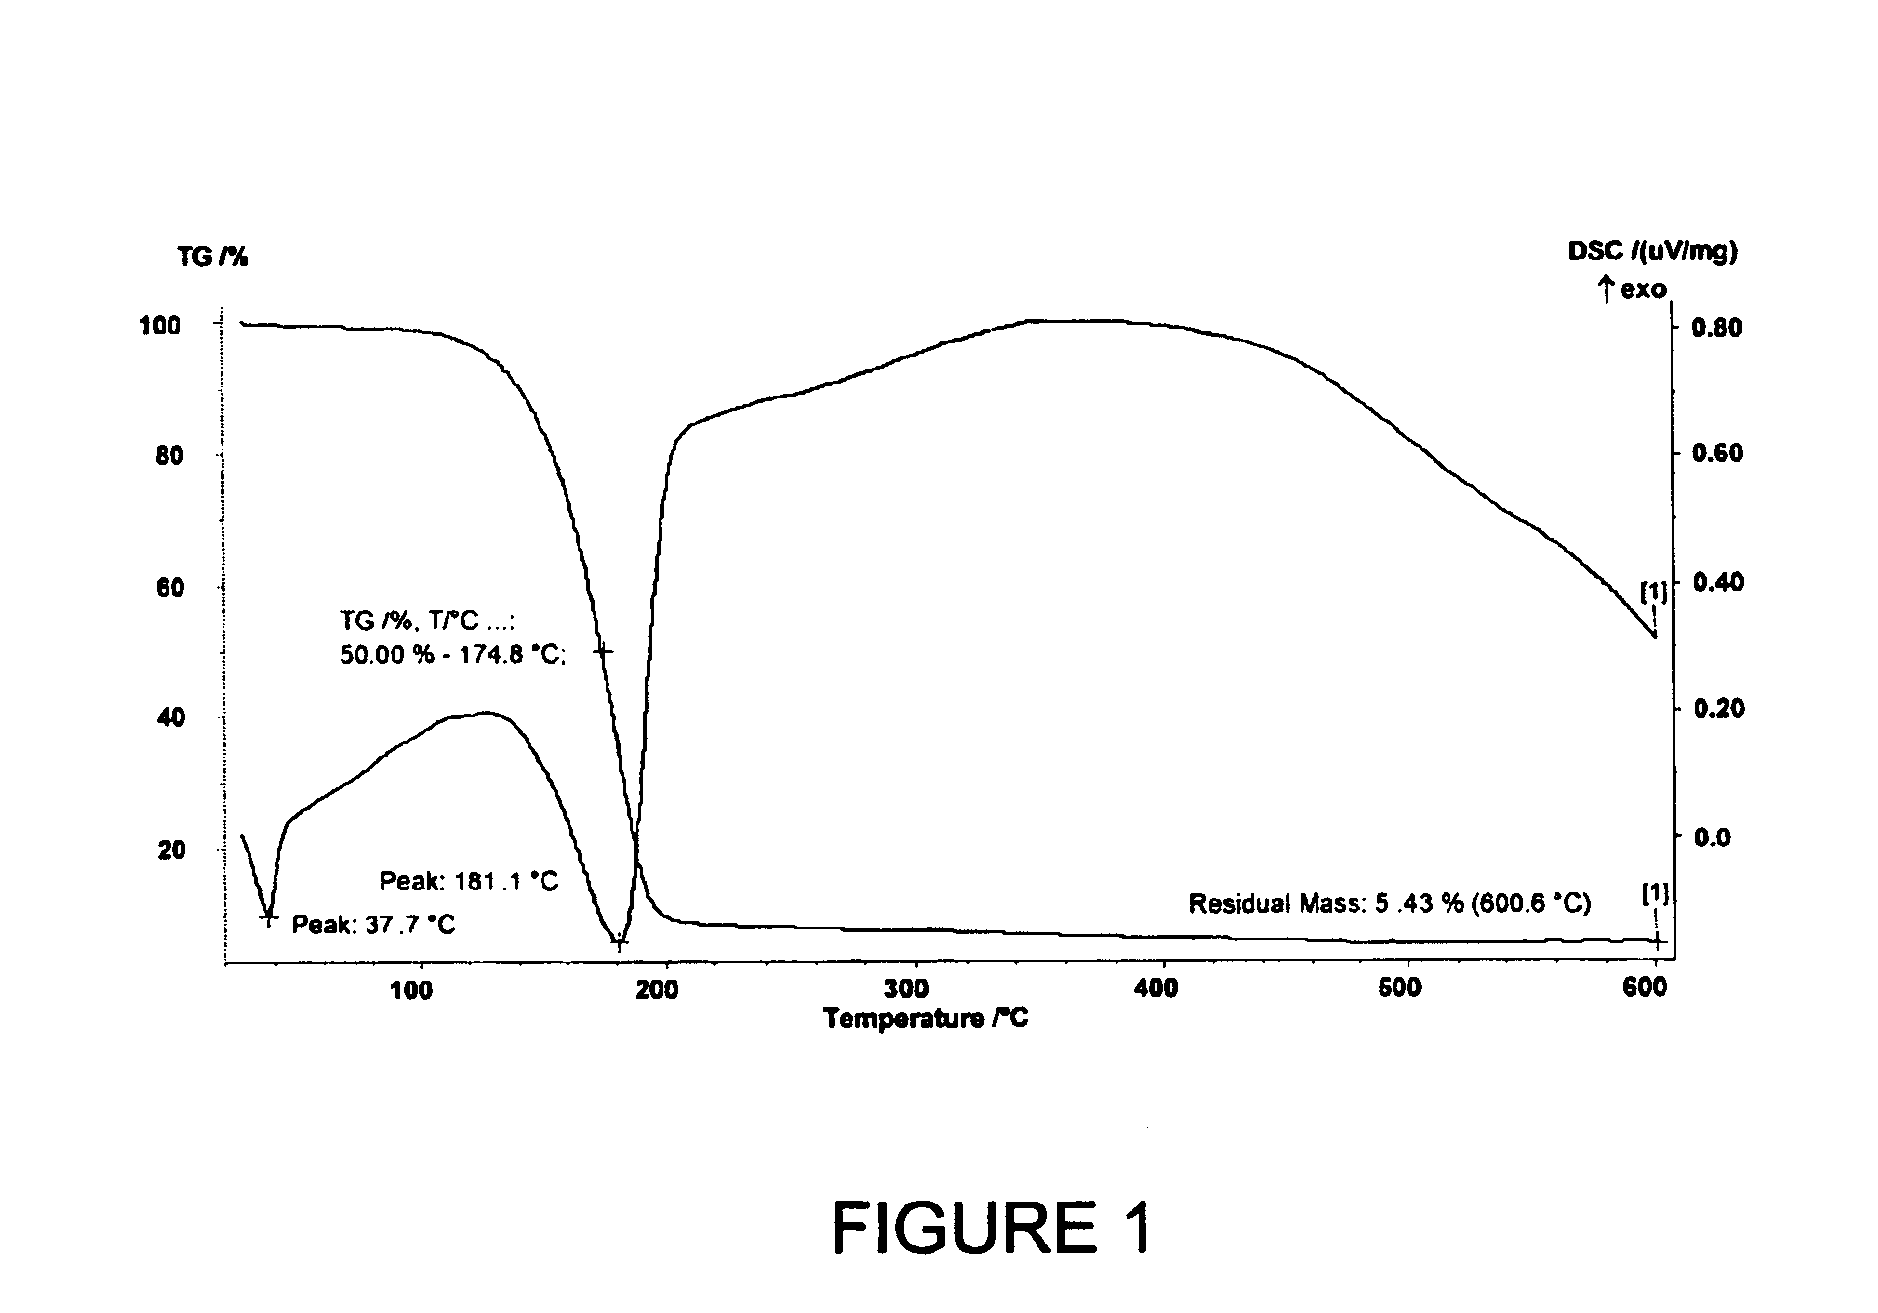 Tantalum amide complexes for depositing tantalum-containing films, and method of making same